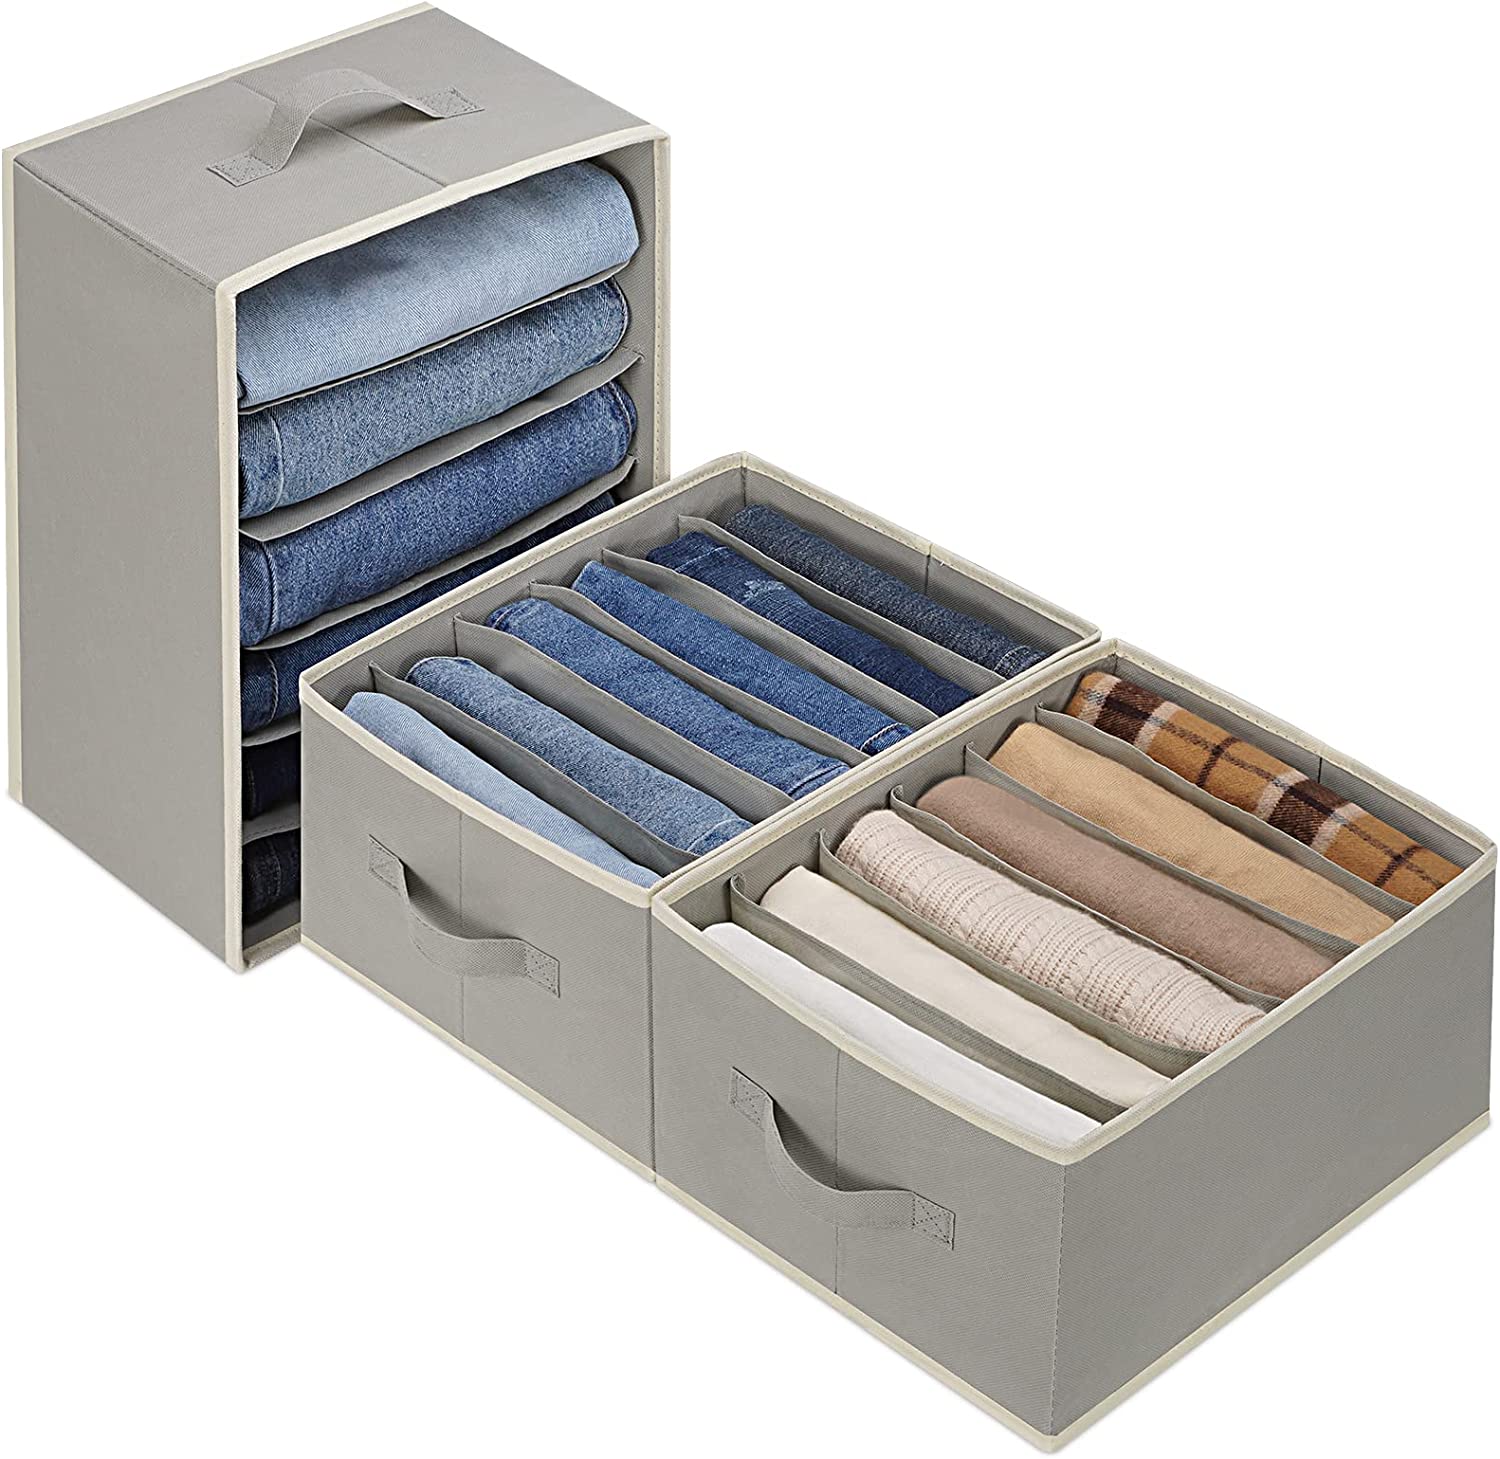 Blushbees Wardrobe Clothes Organizers 6 Grids for Pants, Jeans, Sweater, T-Shirt, Dress etc